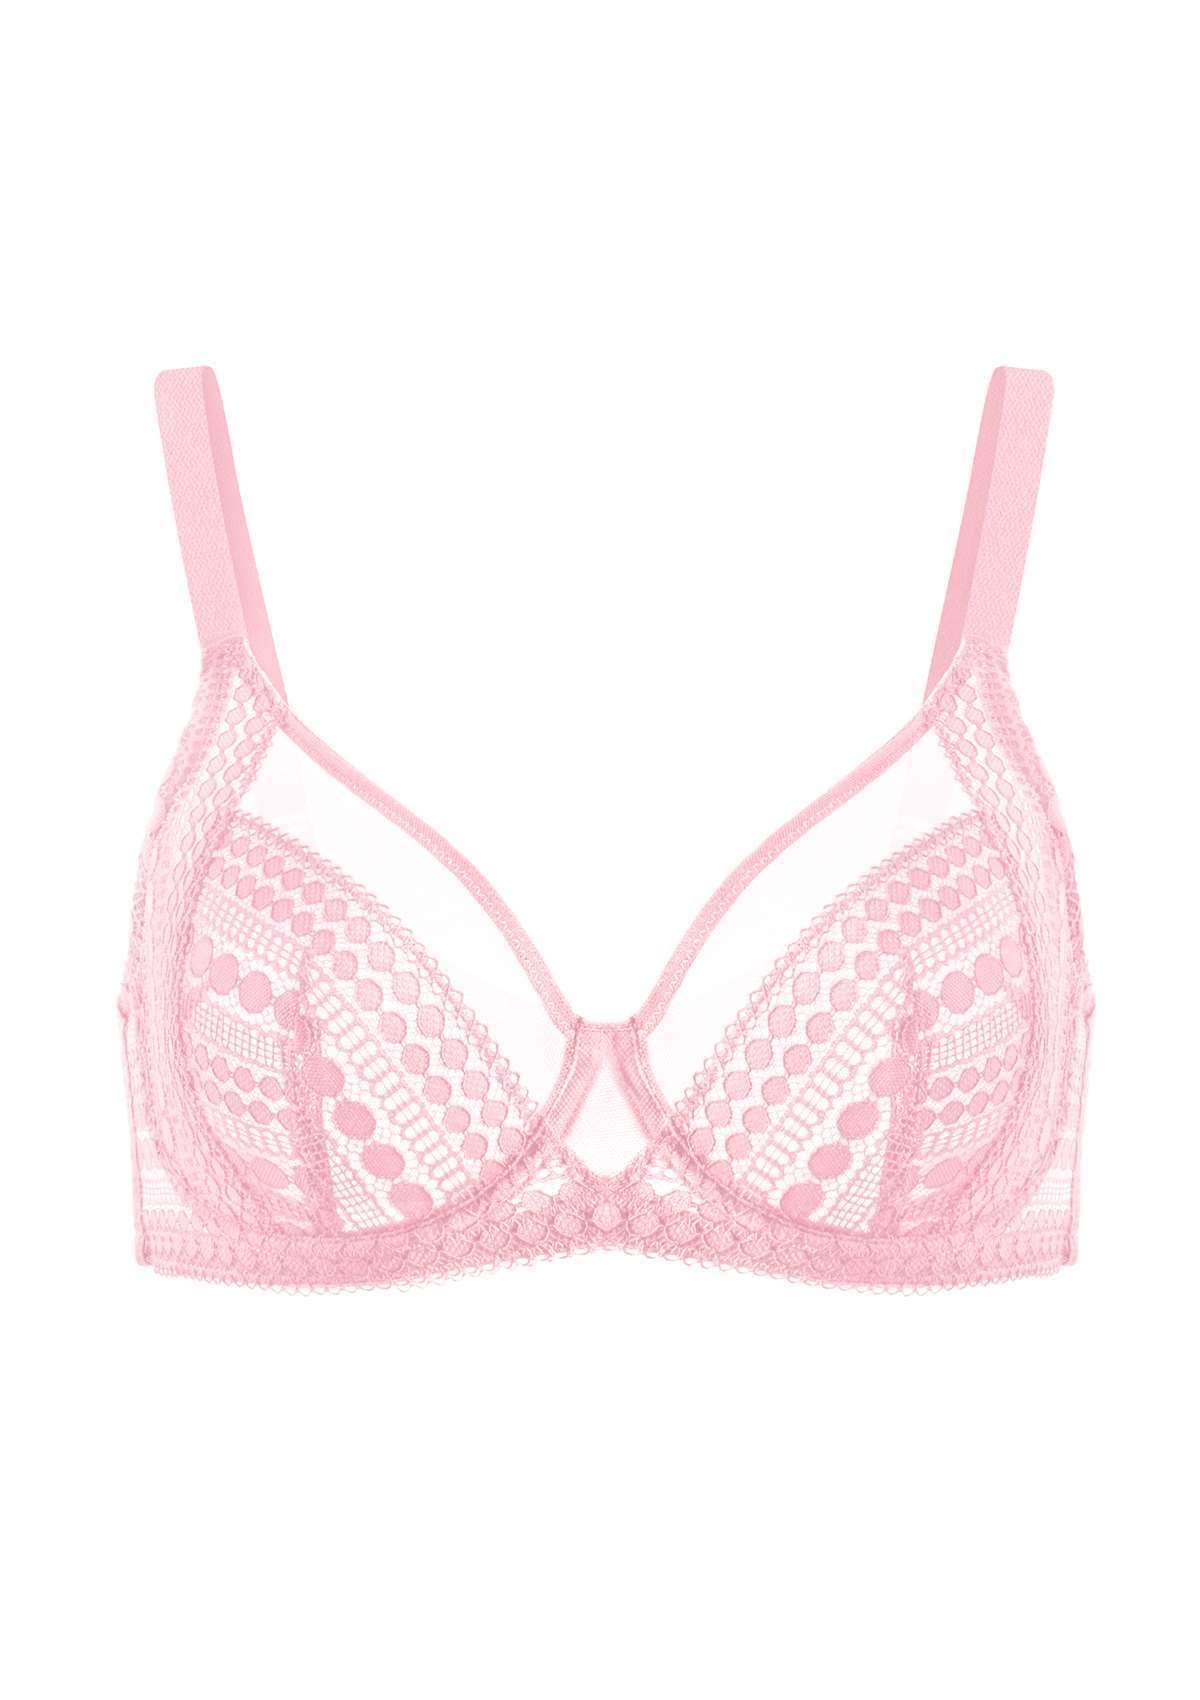 HSIA Heroine Lace Bra And Panties Set: Most Comfortable Supportive Bra - Pink / 40 / DDD/F